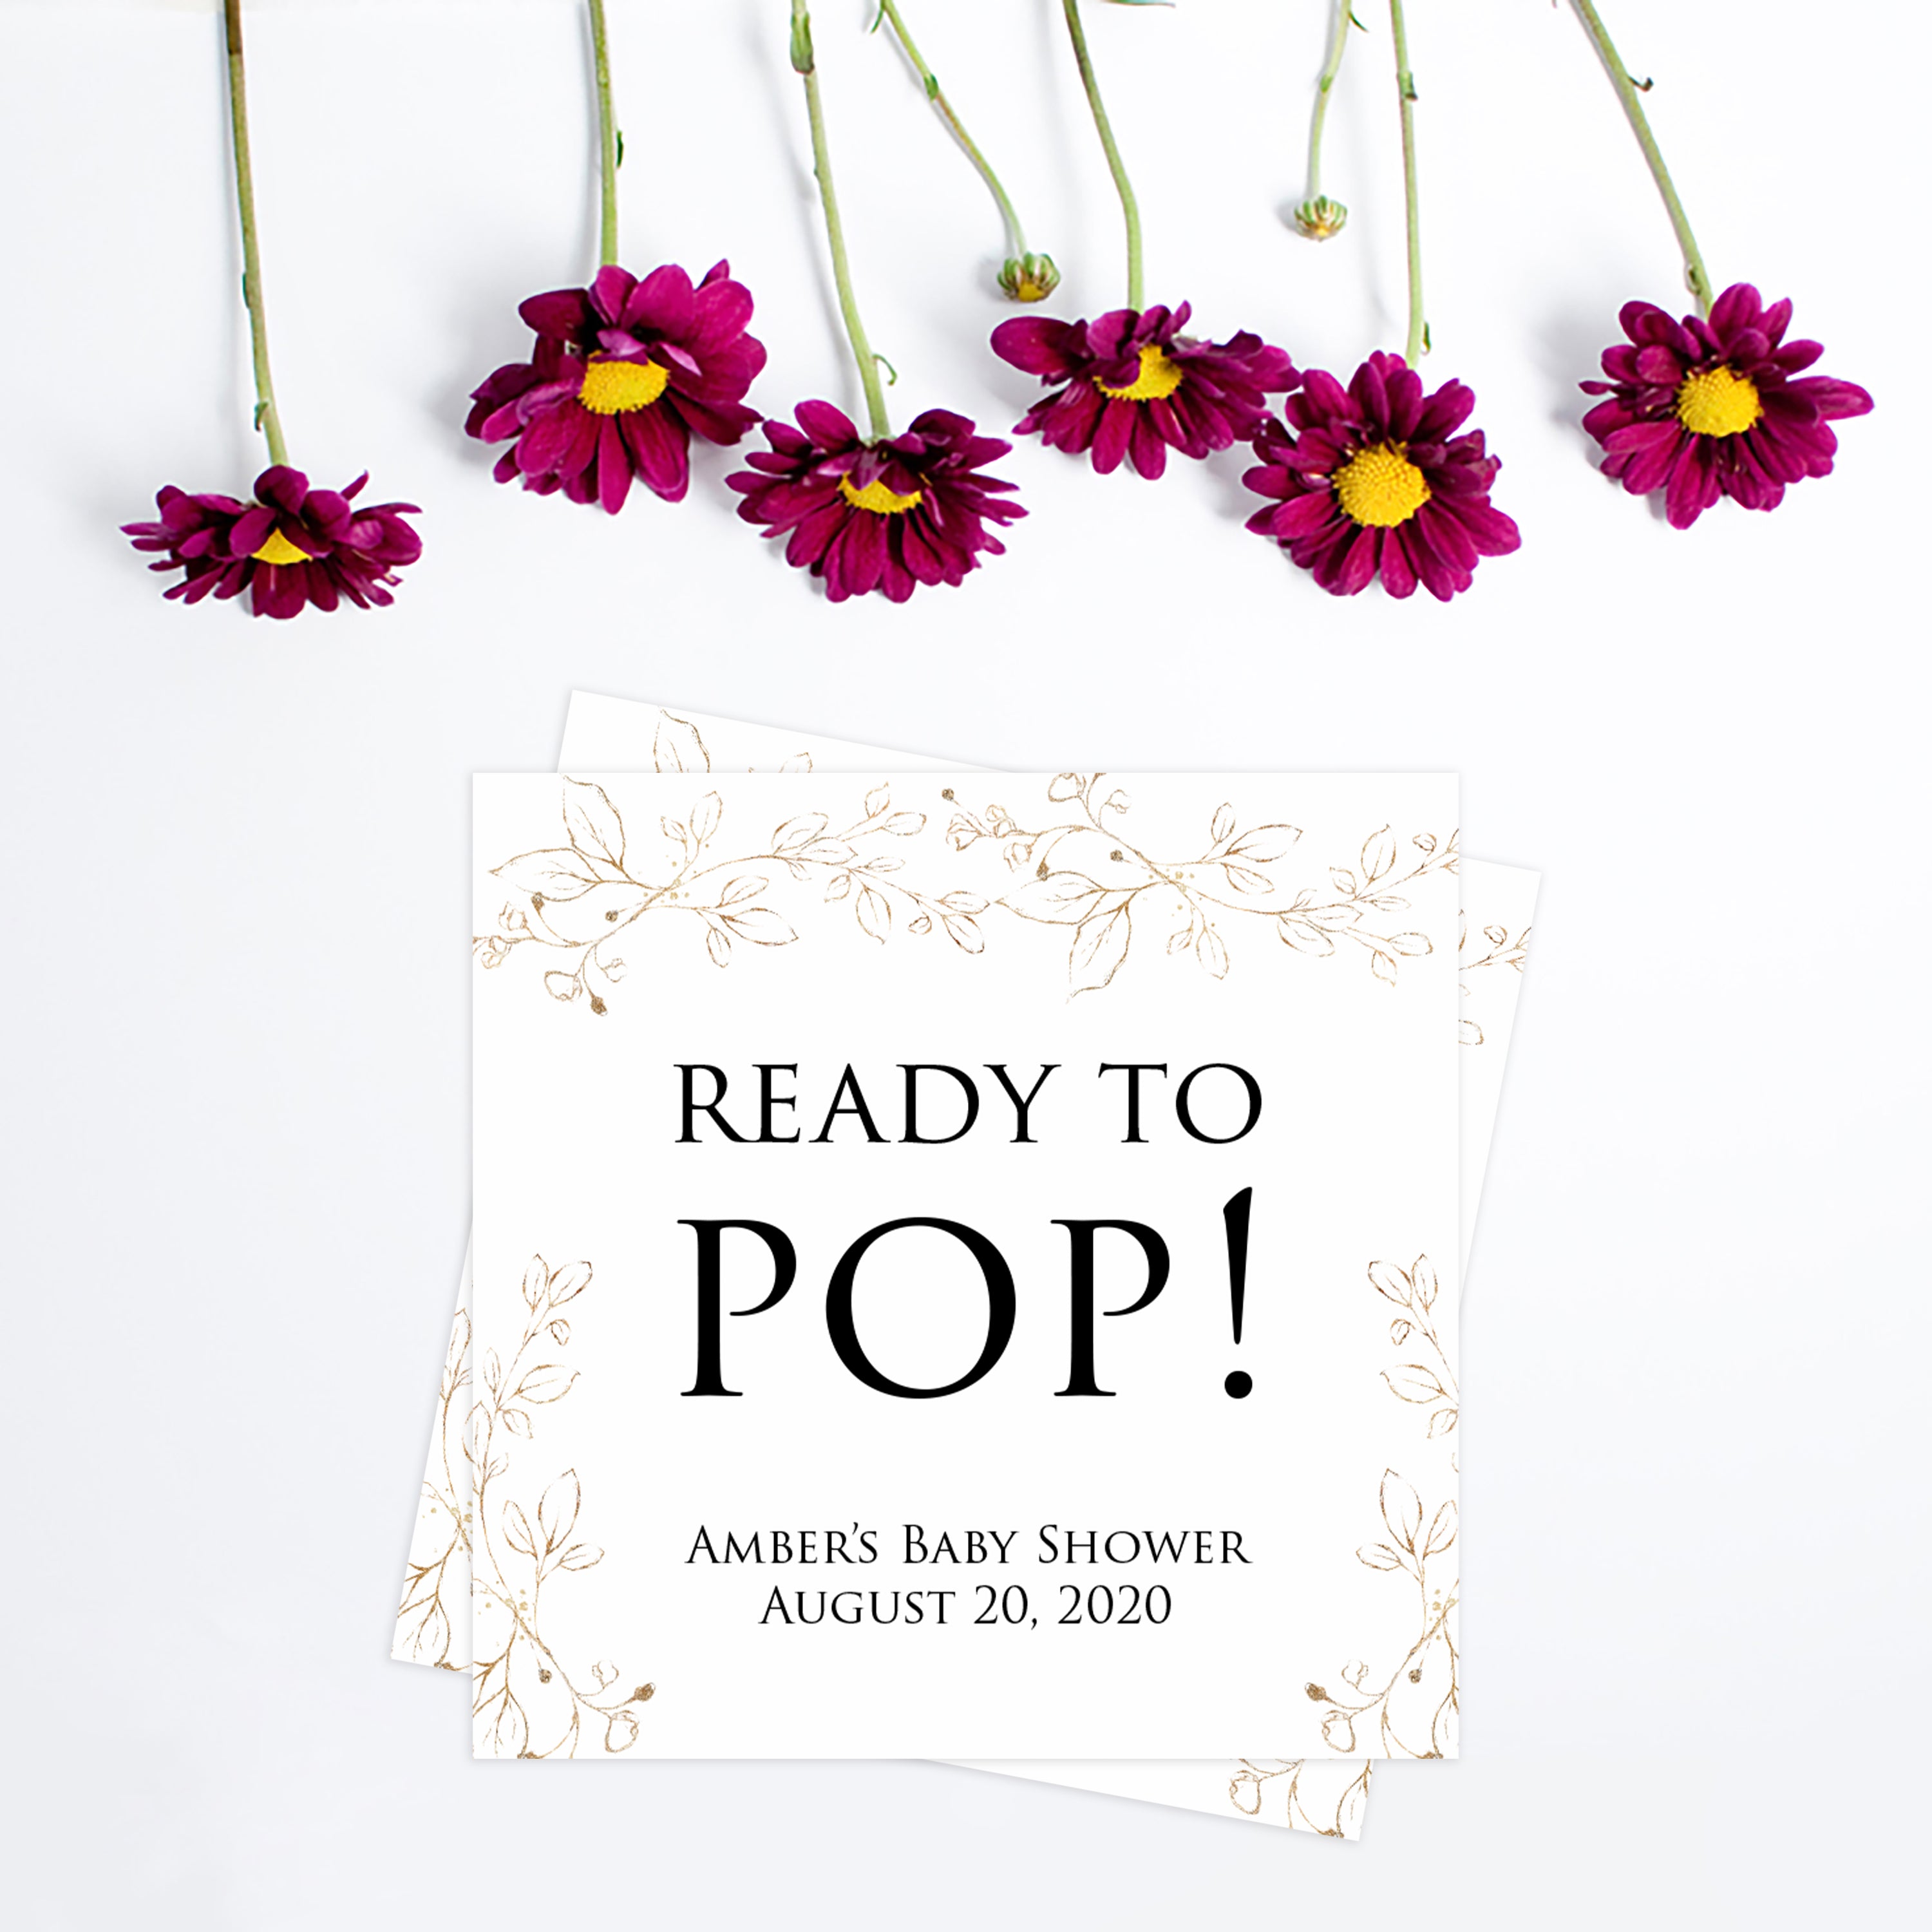 ready to pop tags, Printable baby shower games, gold leaf baby games, baby shower games, fun baby shower ideas, top baby shower ideas, gold leaf baby shower, baby shower games, fun gold leaf baby shower ideas